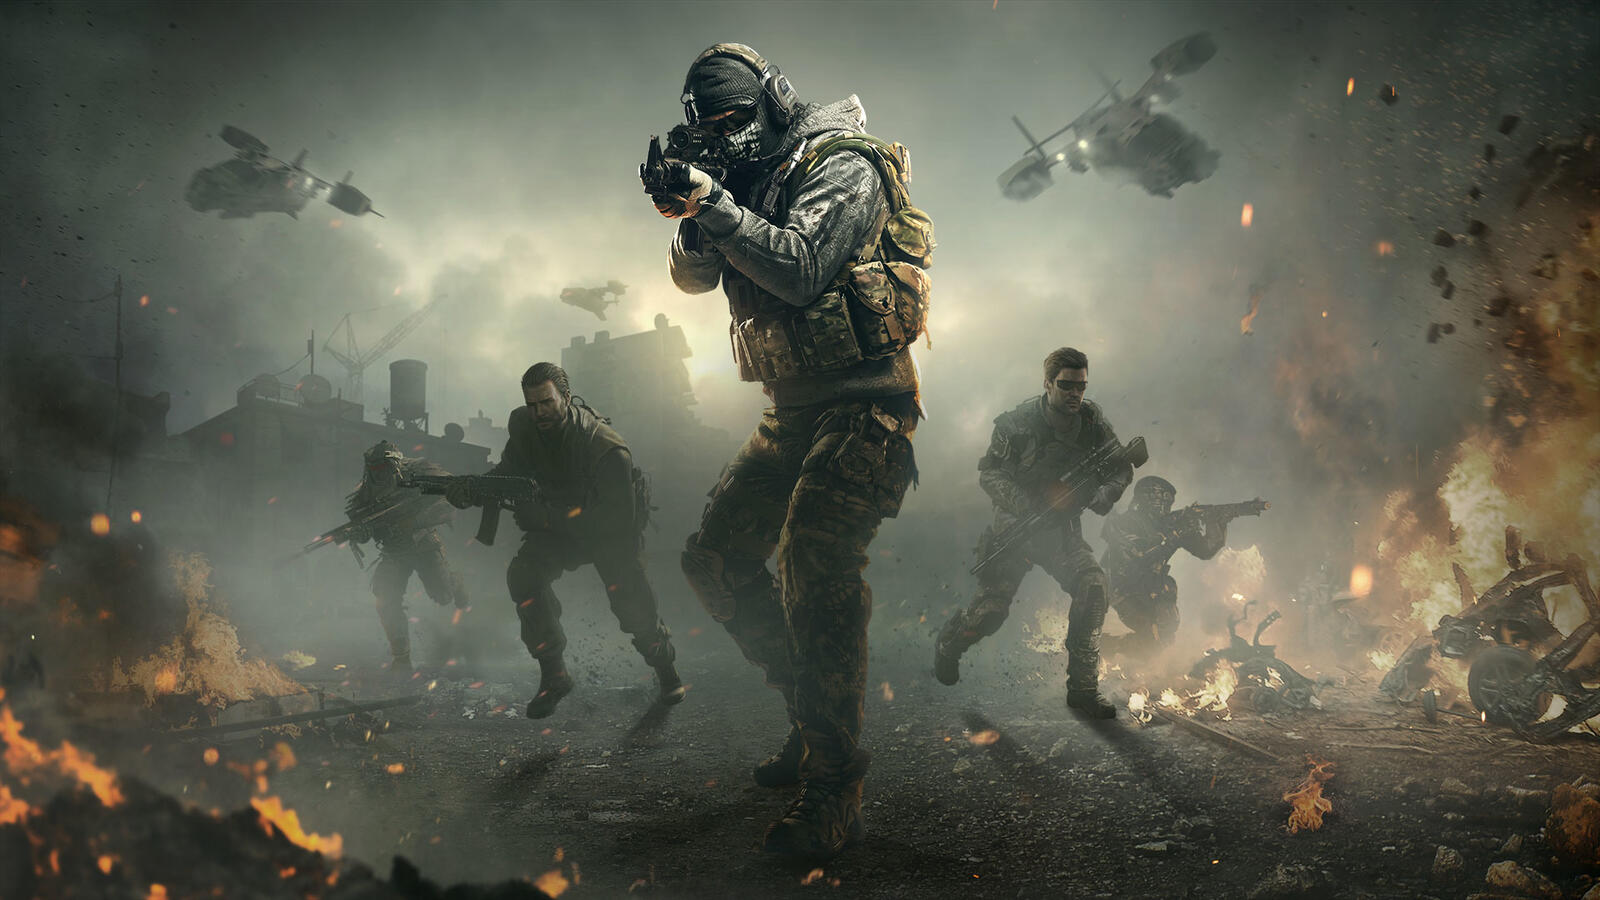 Wallpapers call of duty Call Of Duty Mobile games 2019 on the desktop